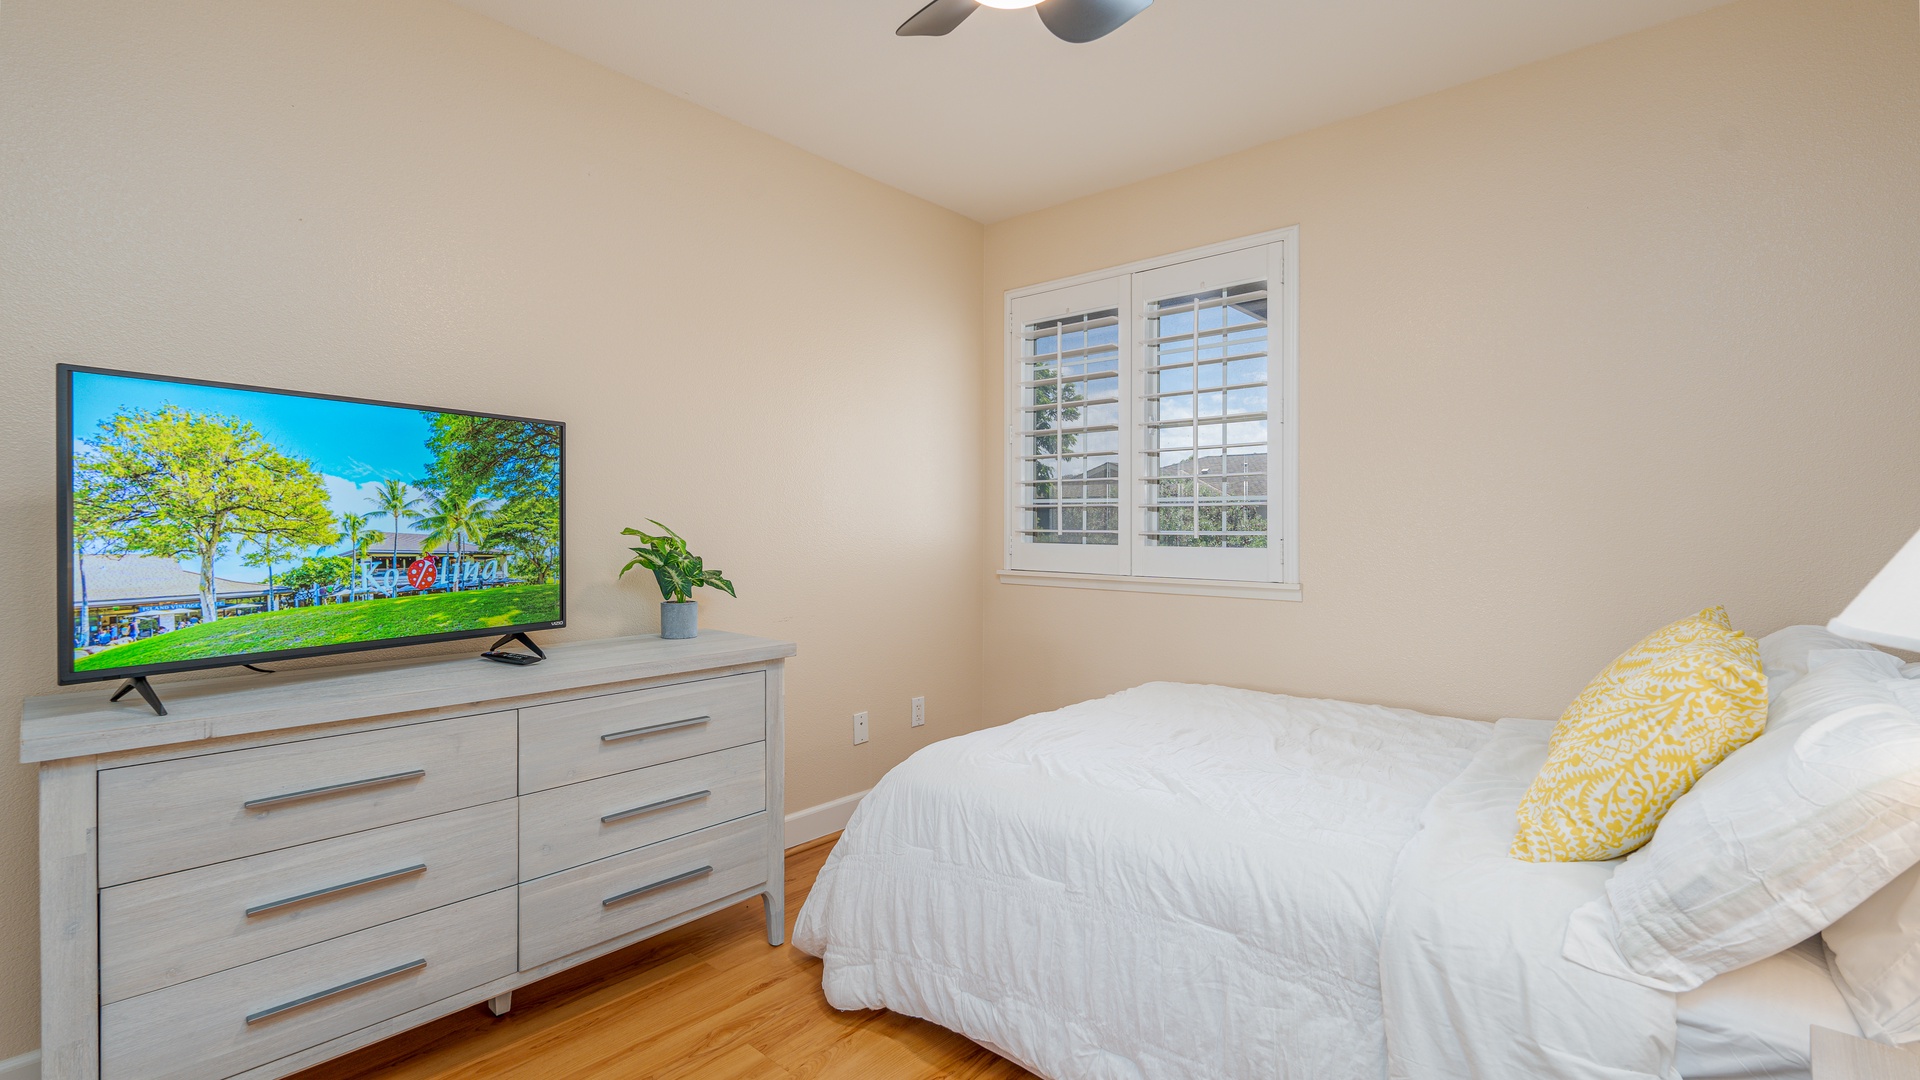 Kapolei Vacation Rentals, Hillside Villas 1496-2 - The third guest bedroom with a dresser, television and cheerful window.